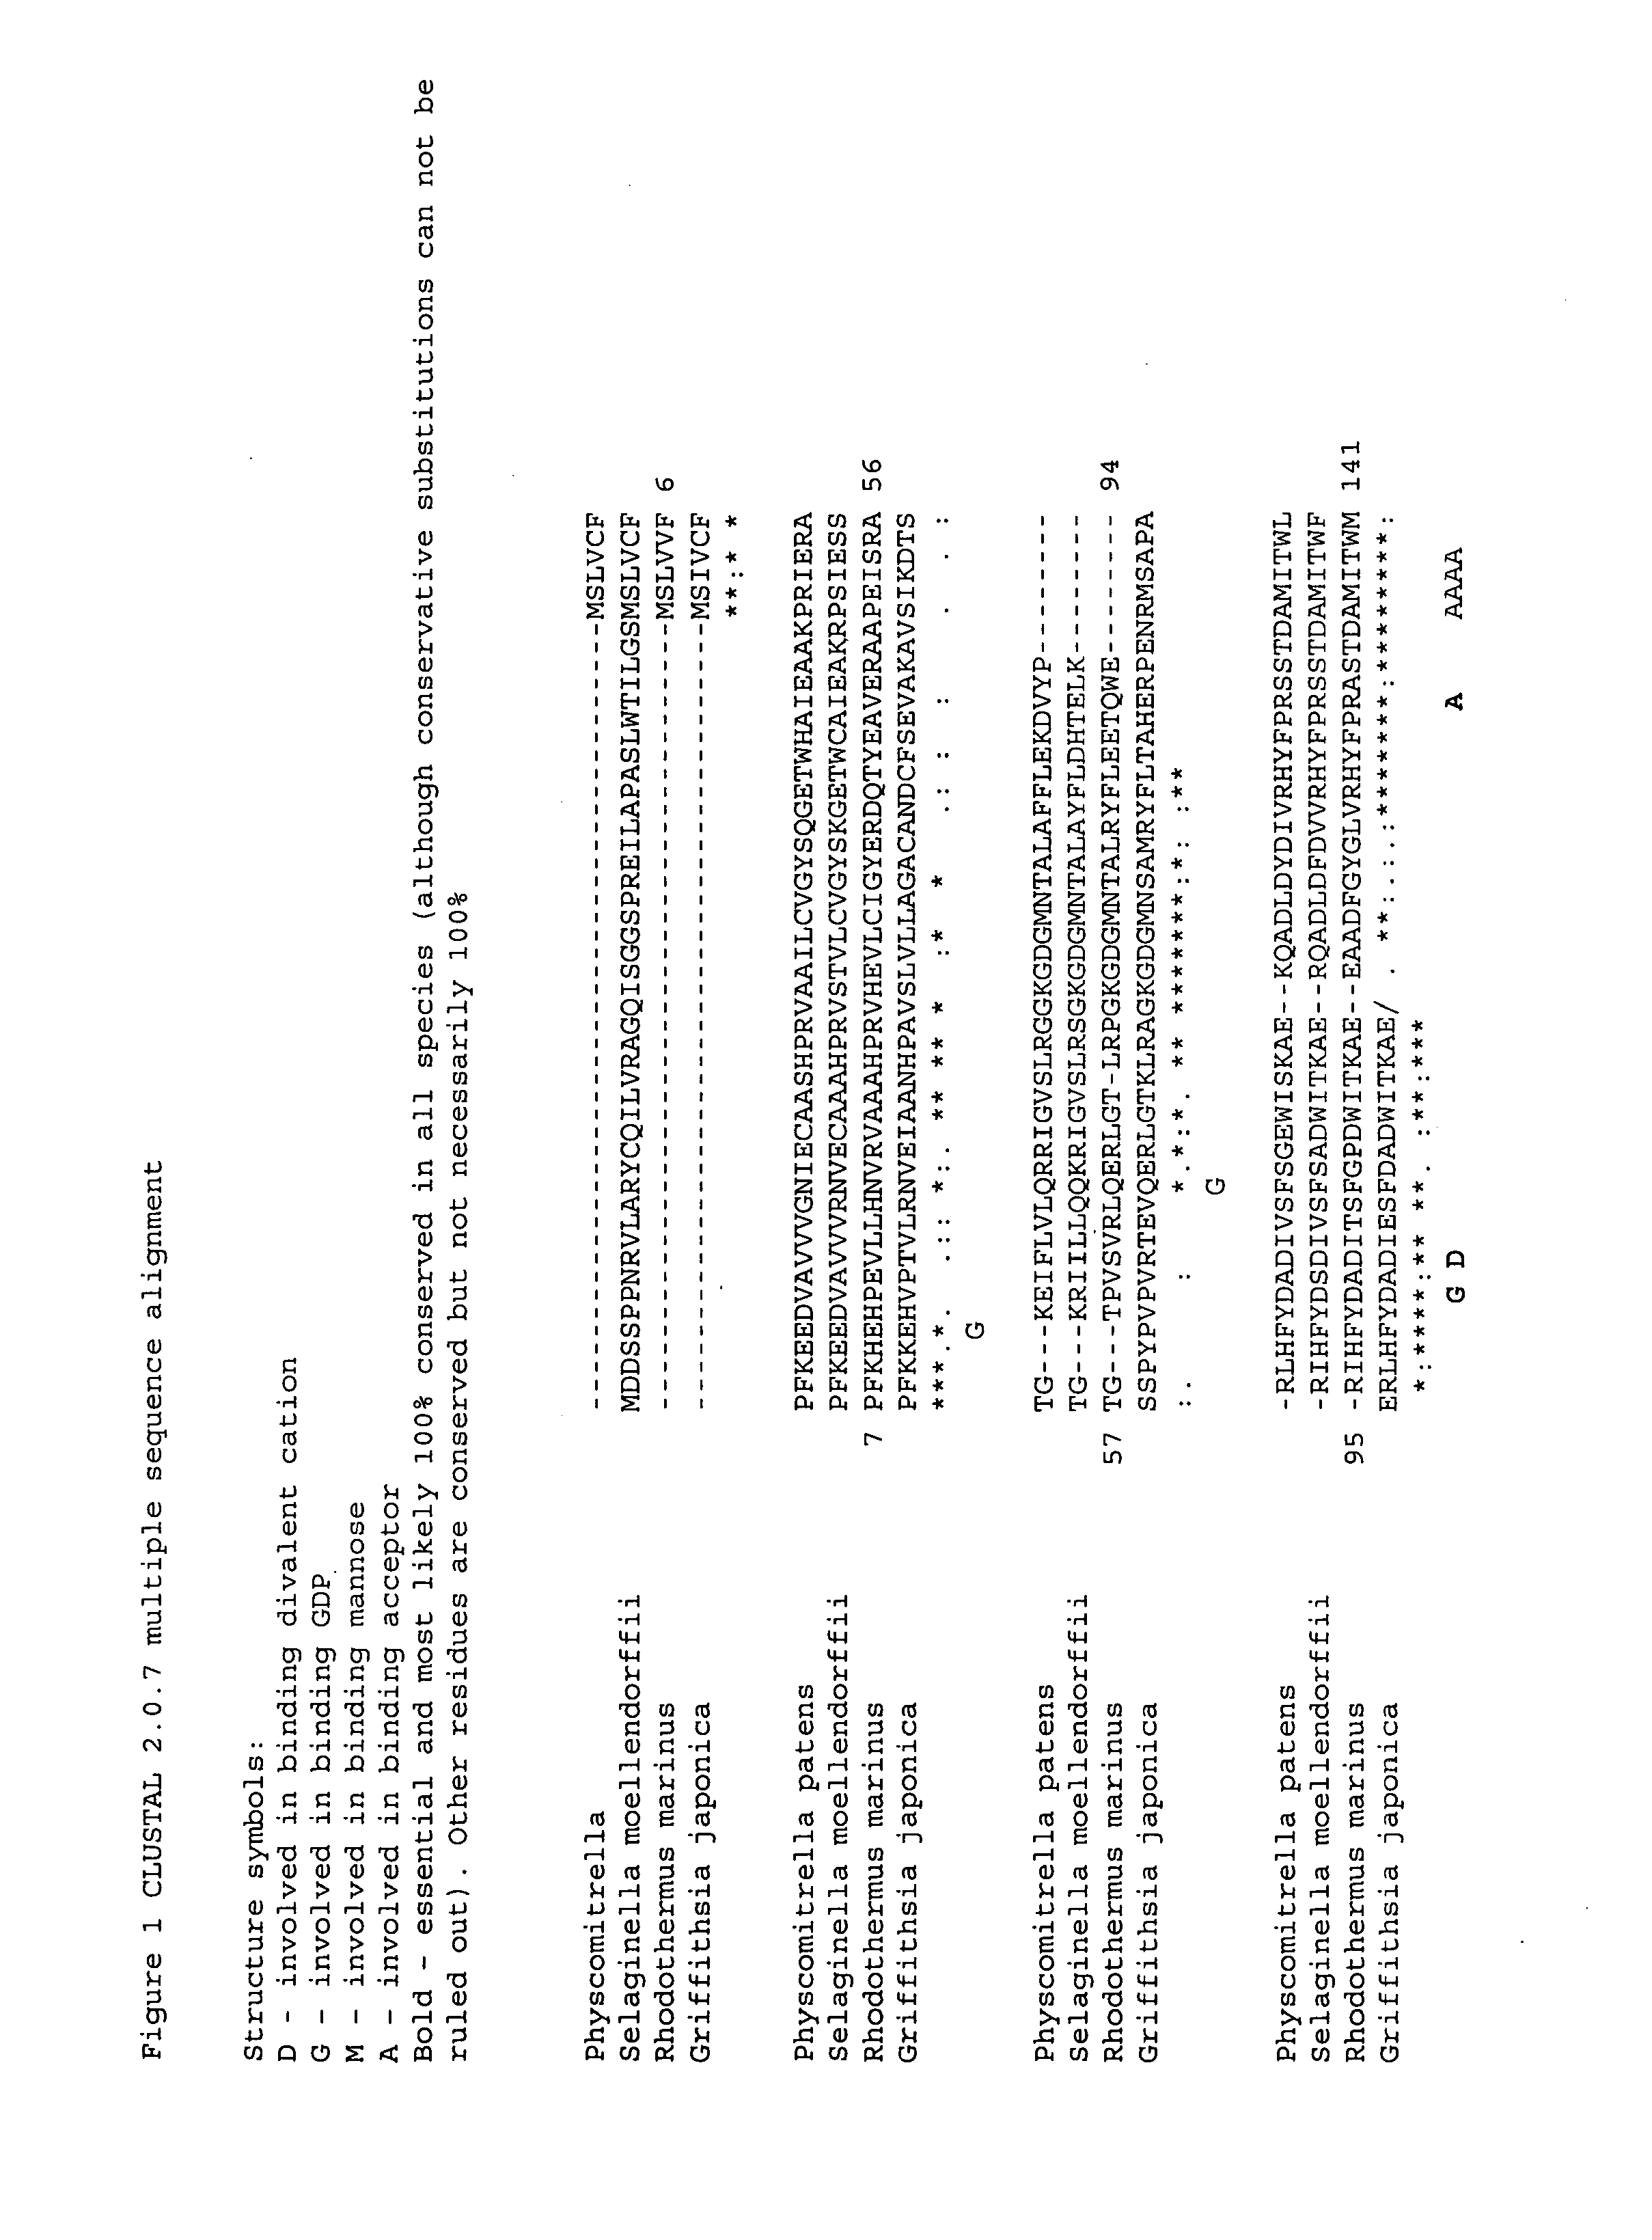 Stress-tolerant plants expressing mannosylglycerate-producing enzymes